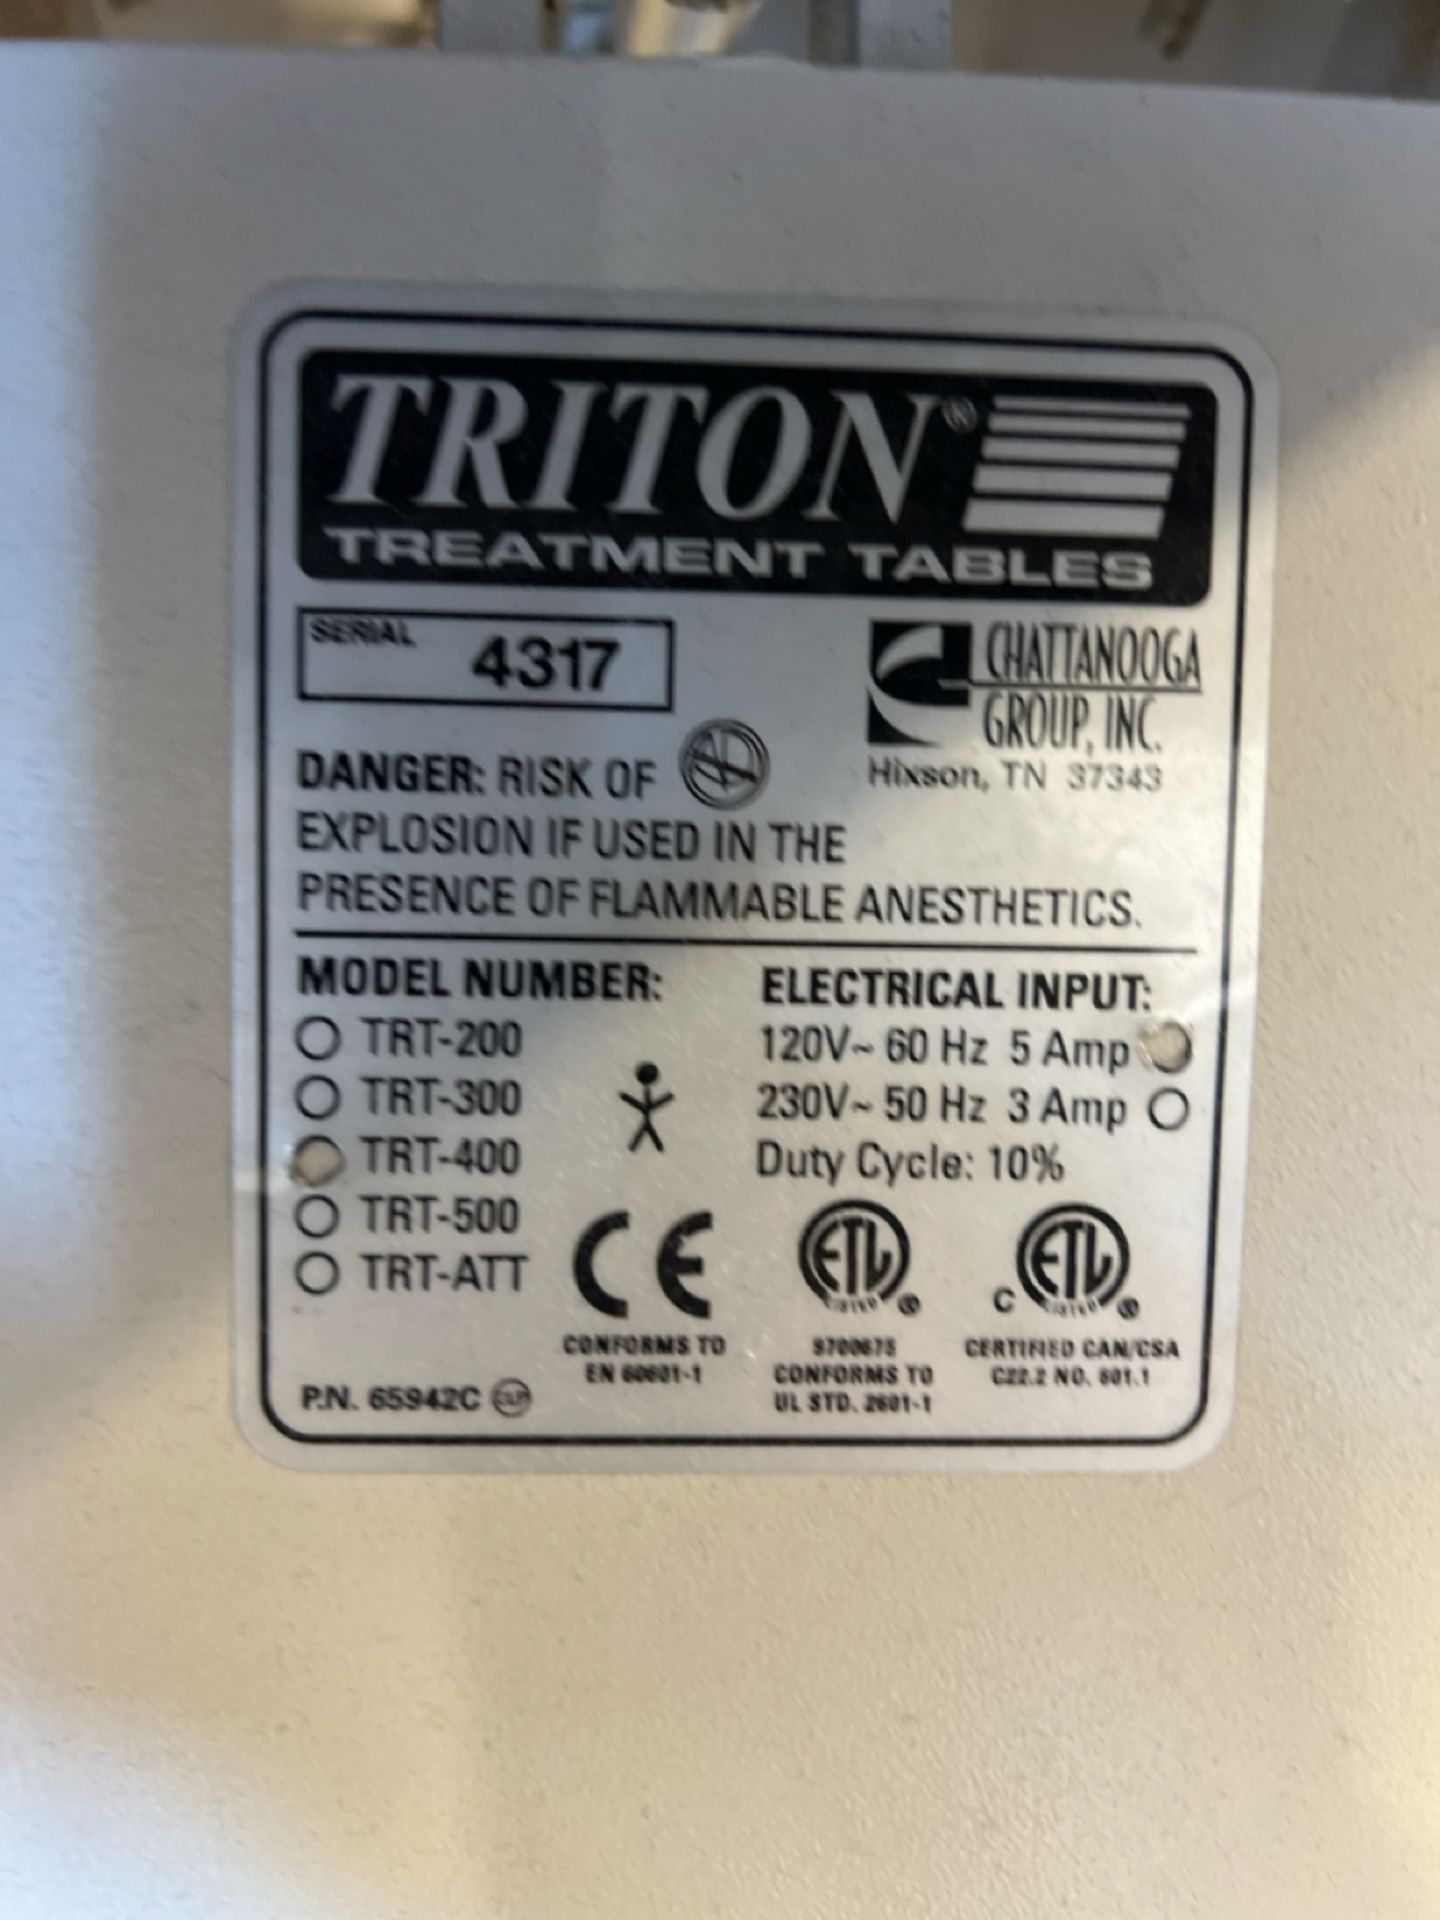 CHATTANOOGA TRITON, TRT-400 POWER THERAPY TABLE WITH TMOD. MP-1 TRACTION UNIT - Image 3 of 3